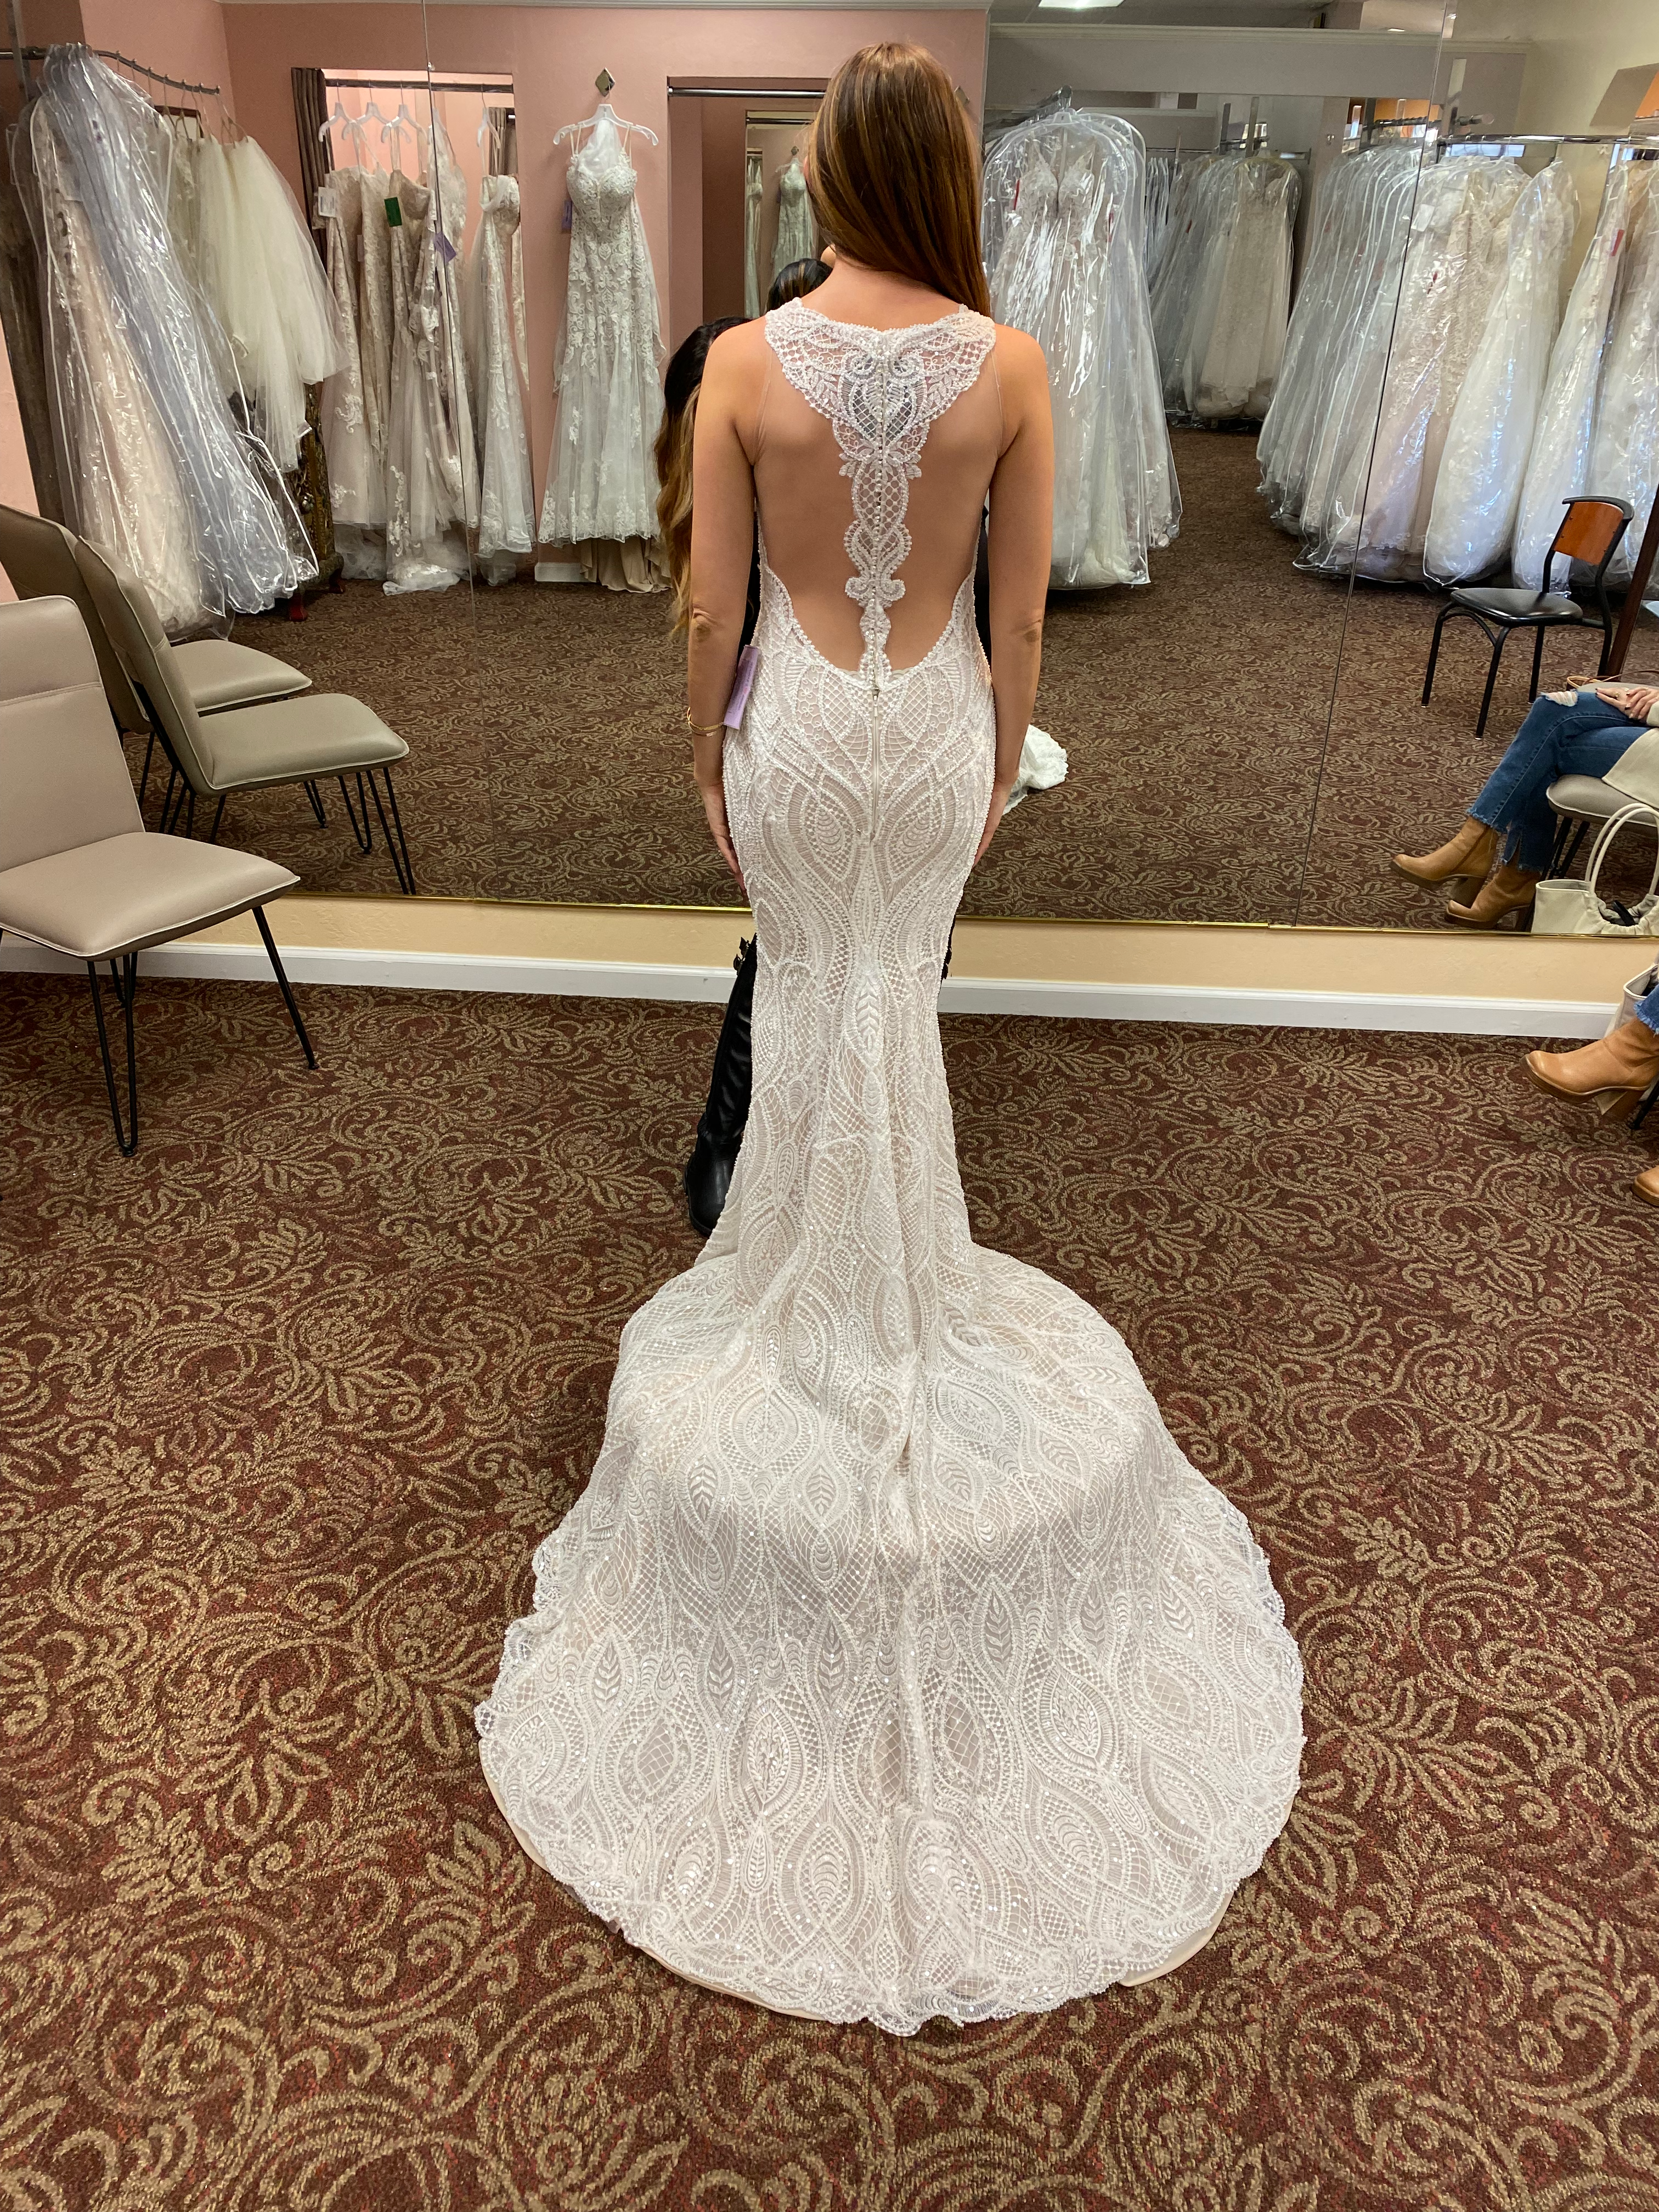 The back of Tara's wedding dress as she's in a bridal boutique looking forward into a mirror.